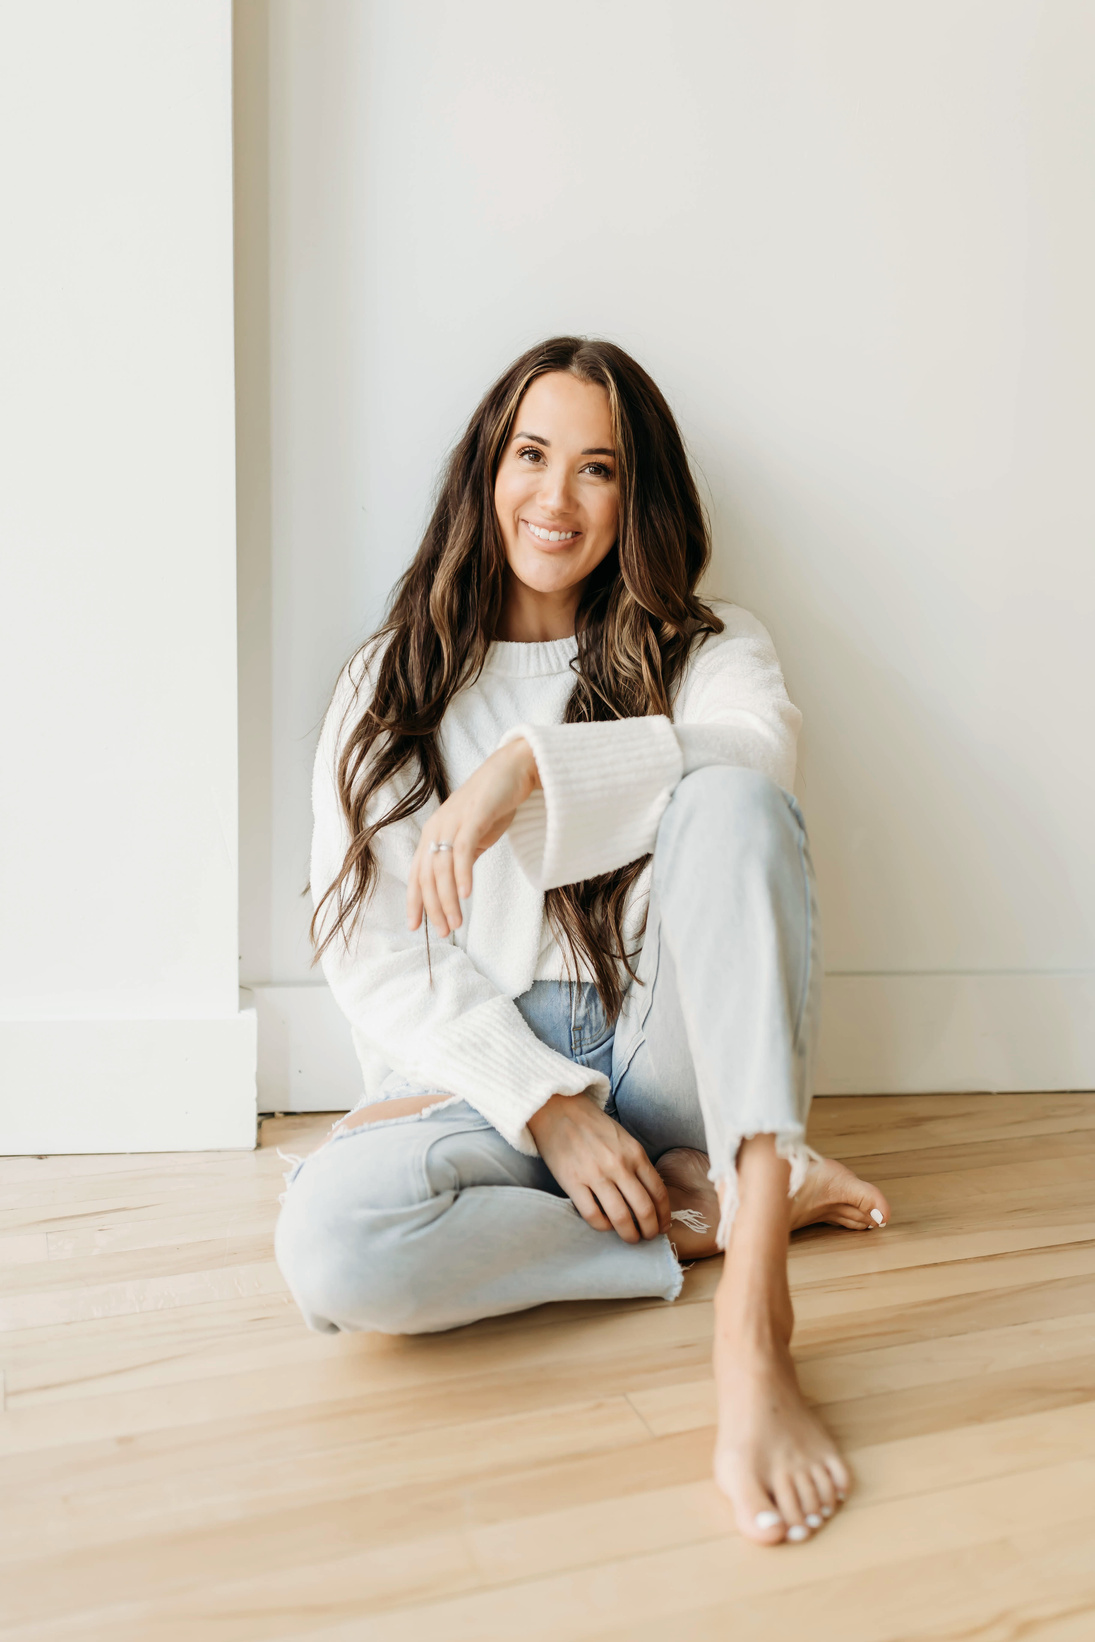 a person sitting on the floor wearing jeans and a white sweater